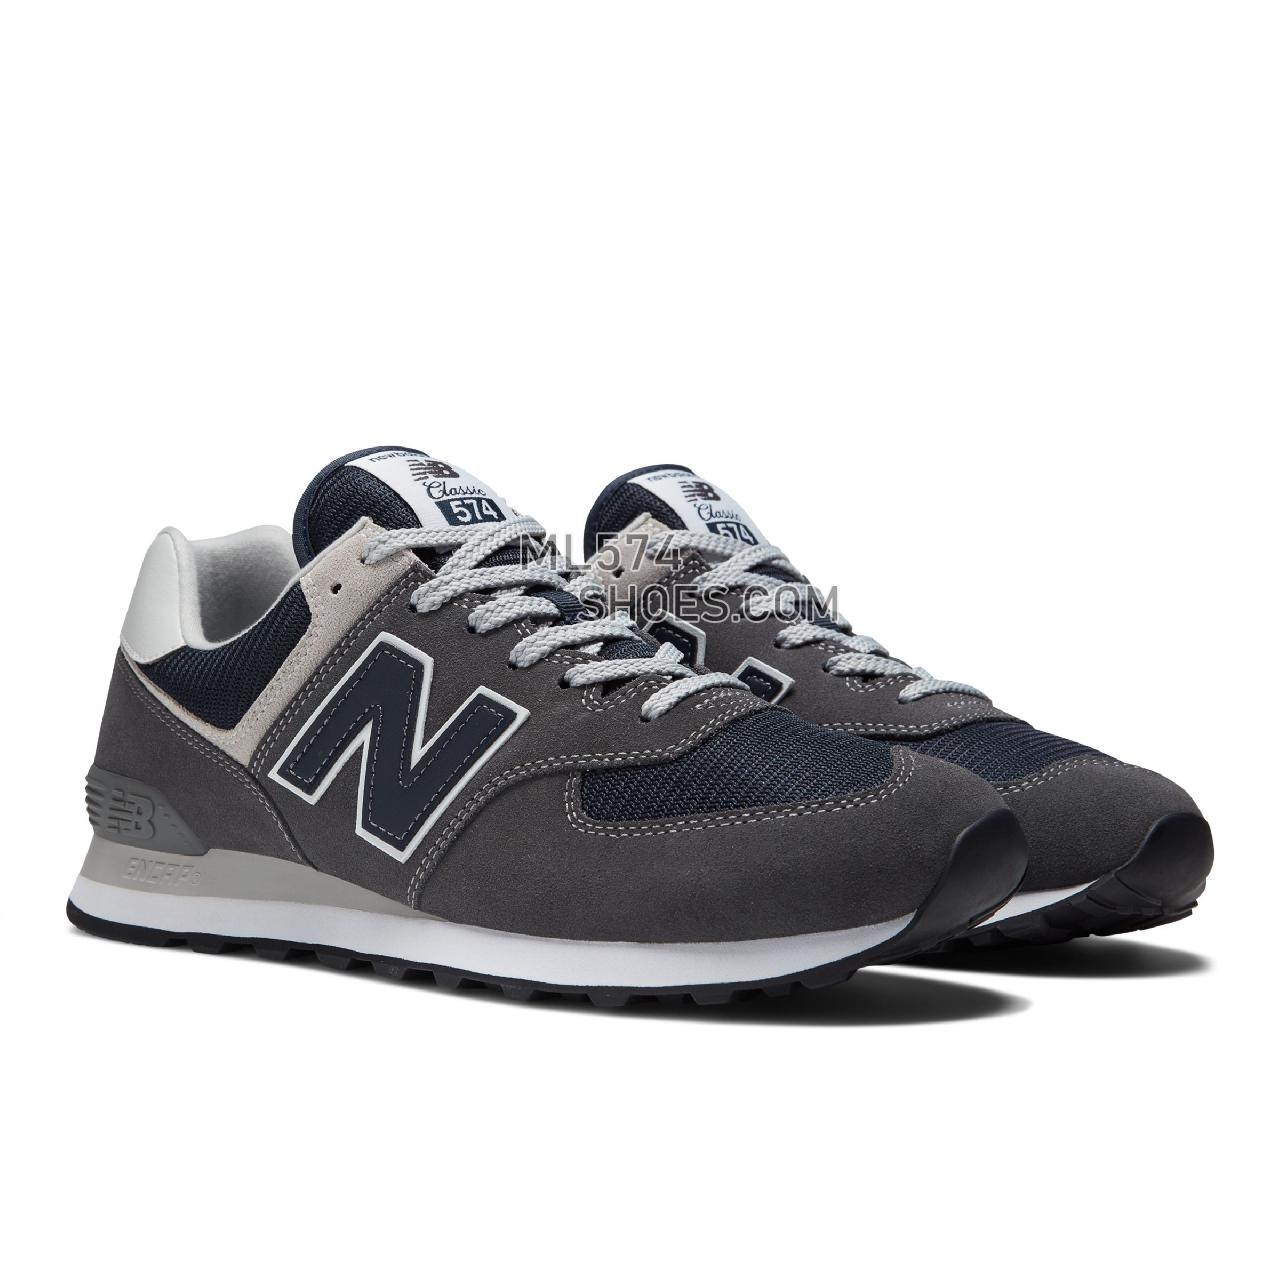 New Balance 574v2 - Men's Classic Sneakers - Grey with Navy - ML574EI2